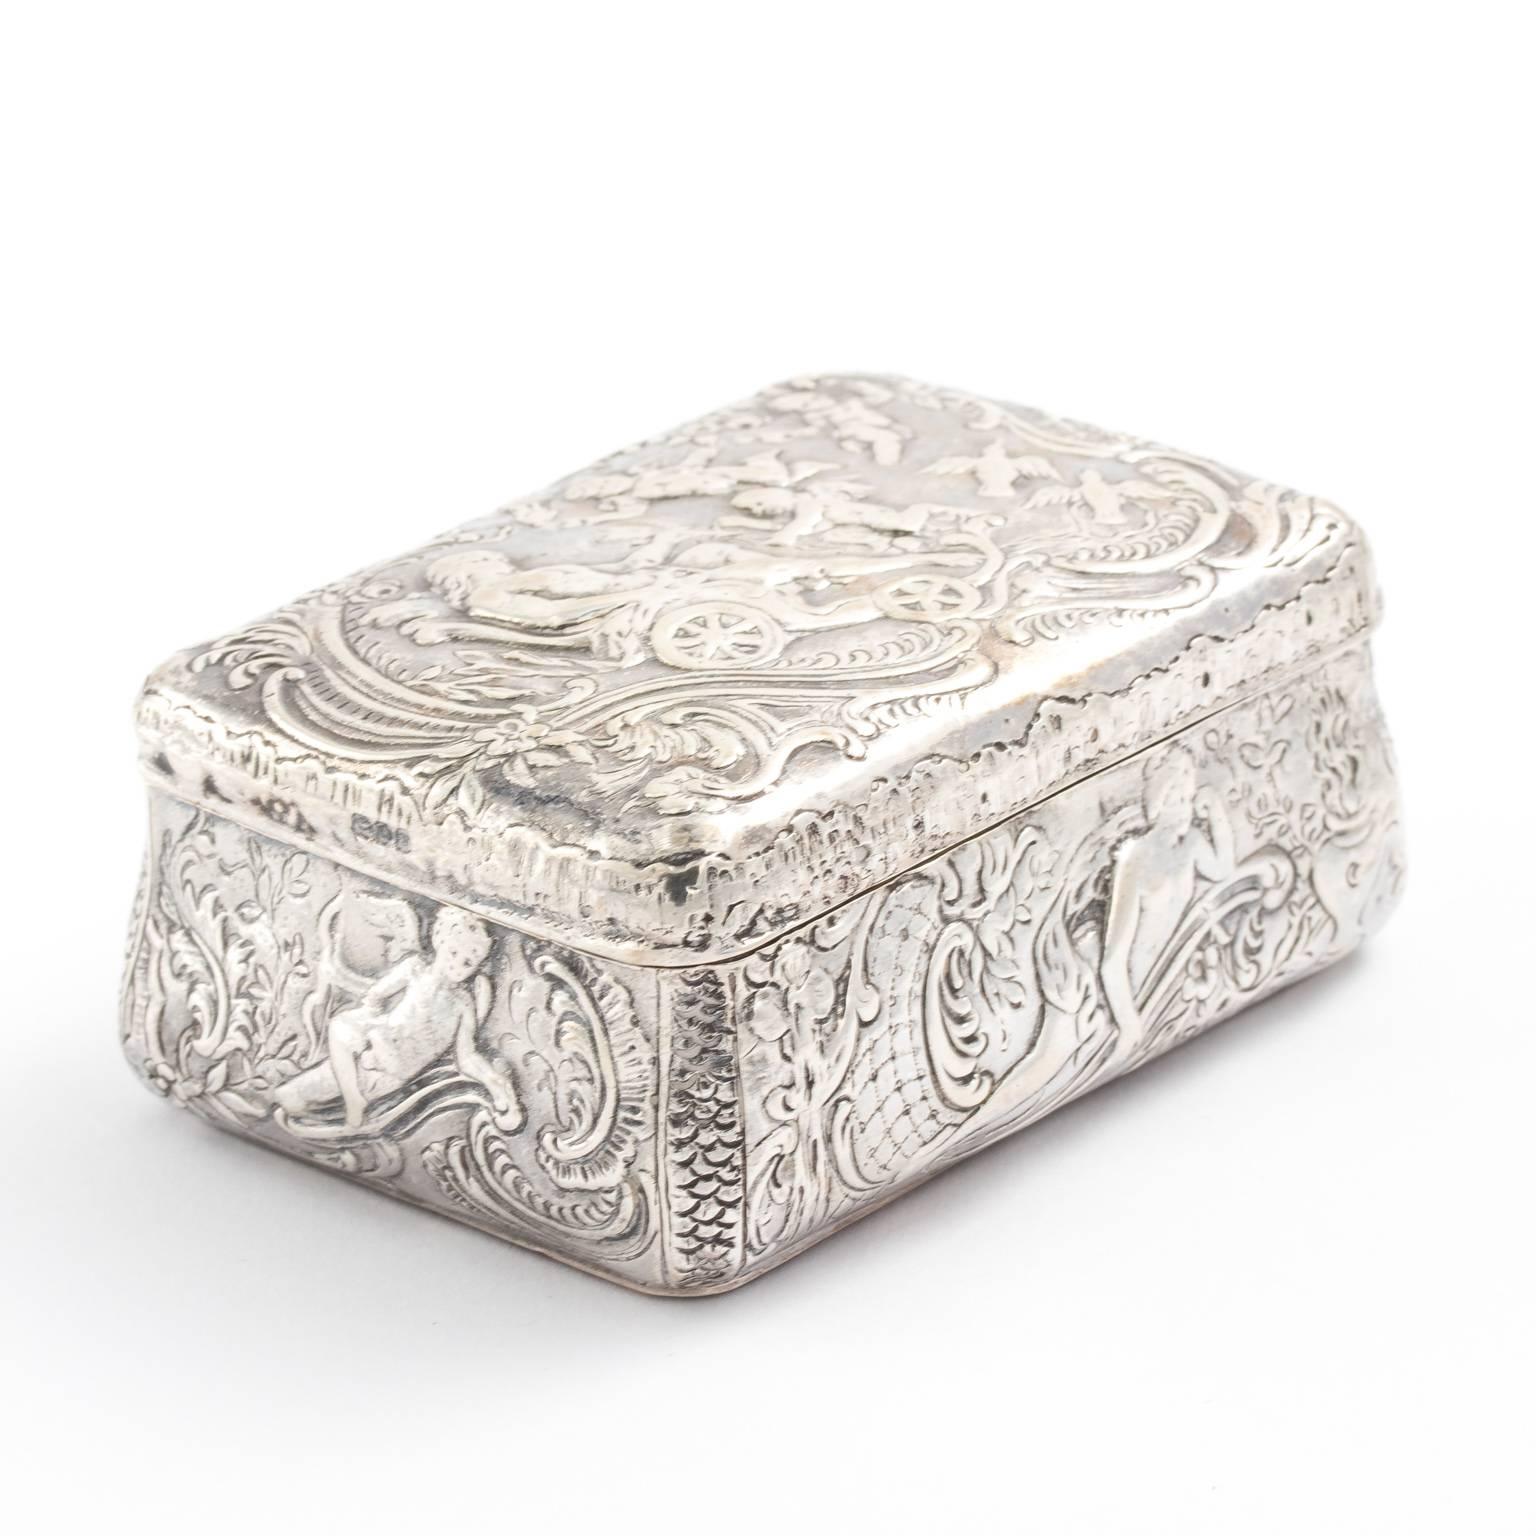 Sterling silver repoussé antique sterling silver trinket or snuff box from England Chester, circa 1900.
 